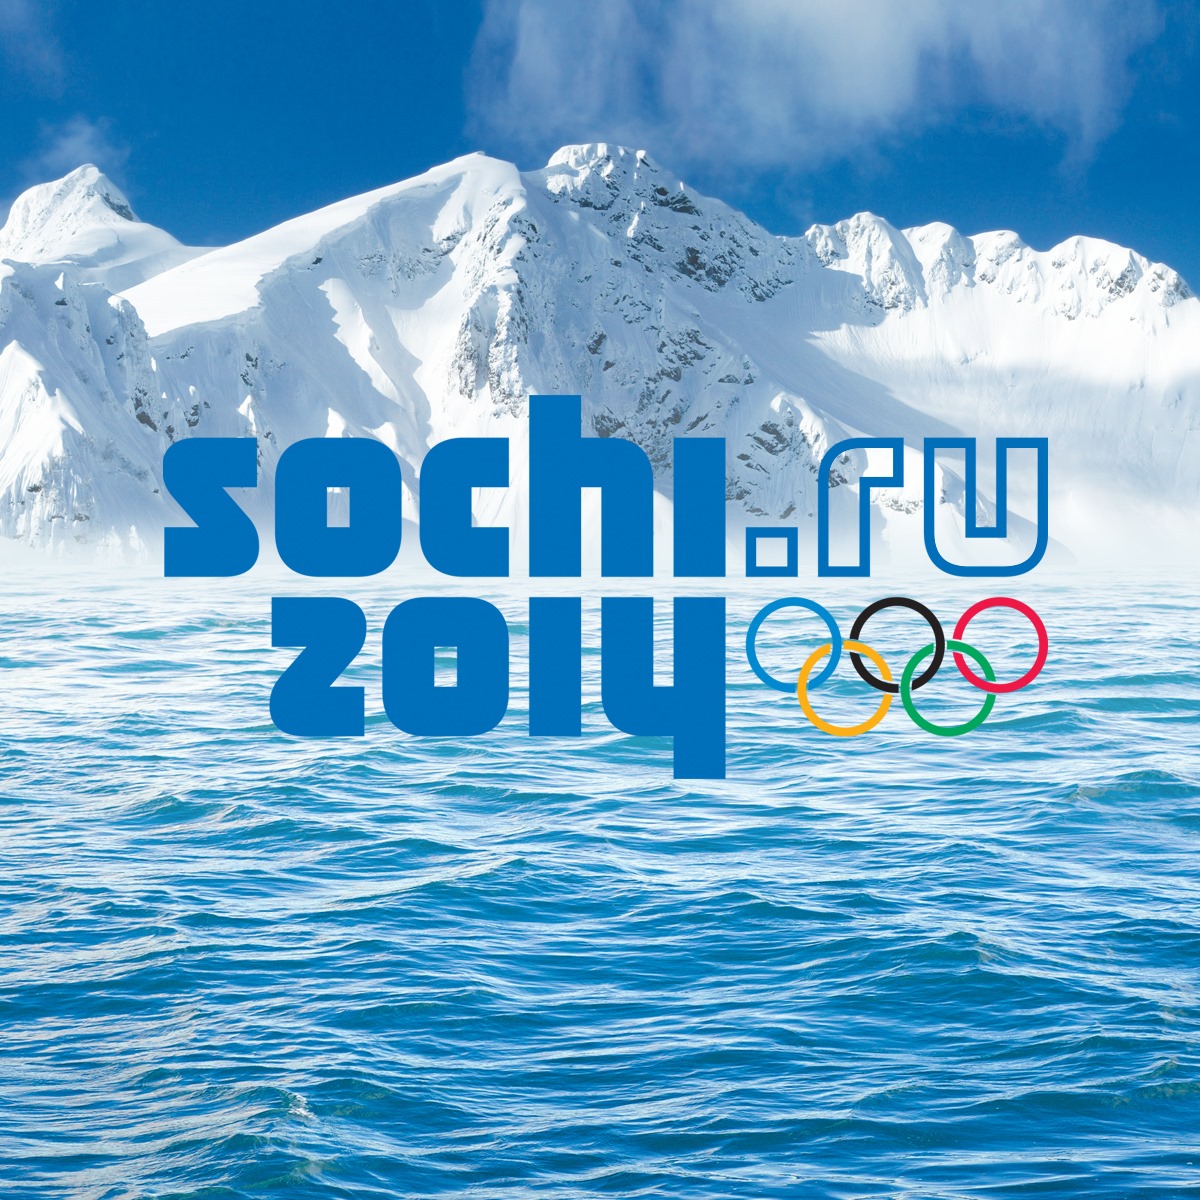 Music for the 2014 Winter Olympics